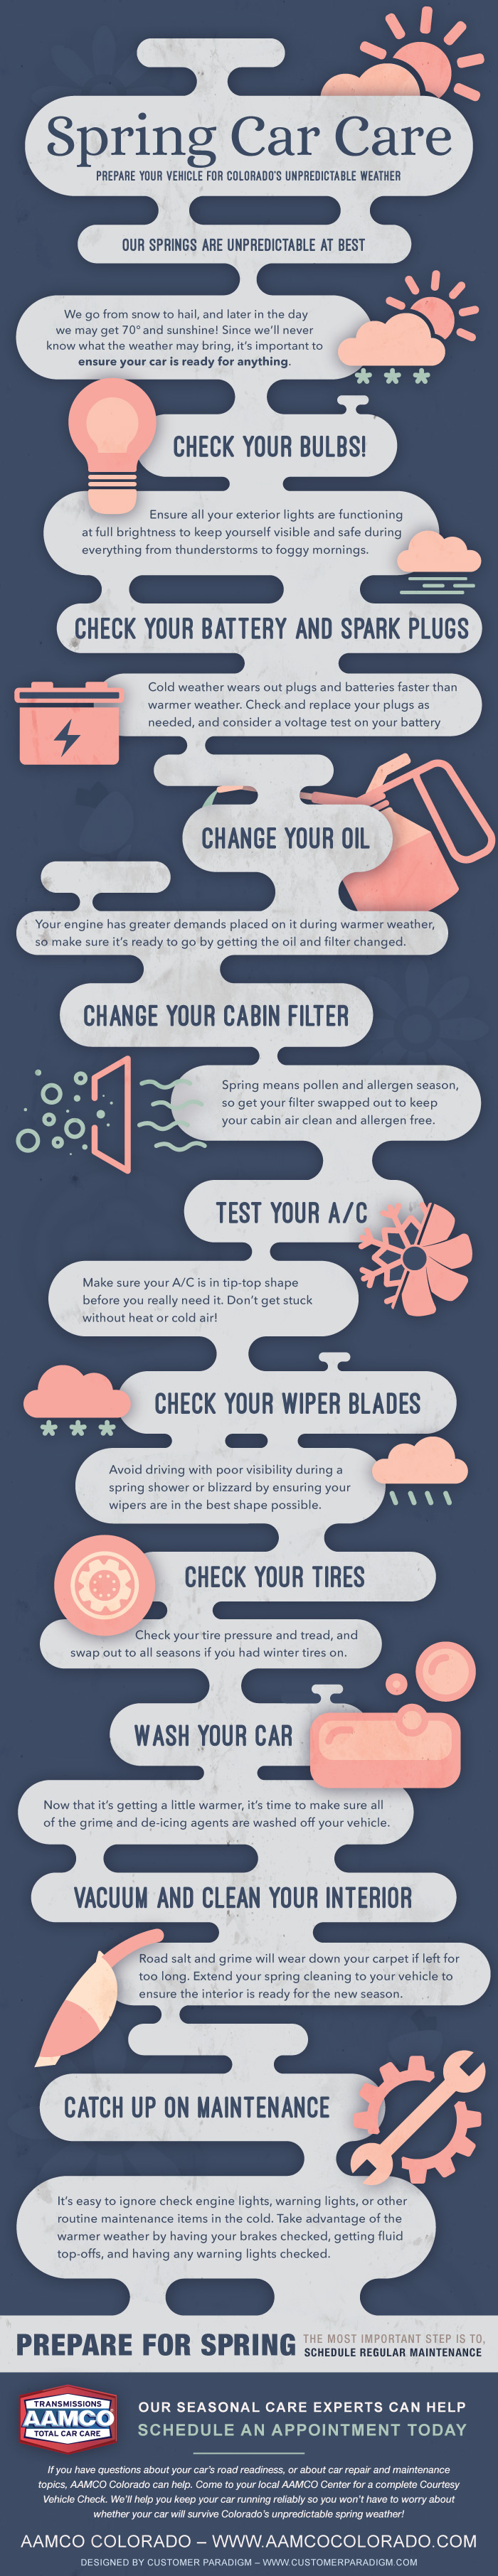 Infographic illustrating Spring Car Care tips to prepare for Colorado Weather